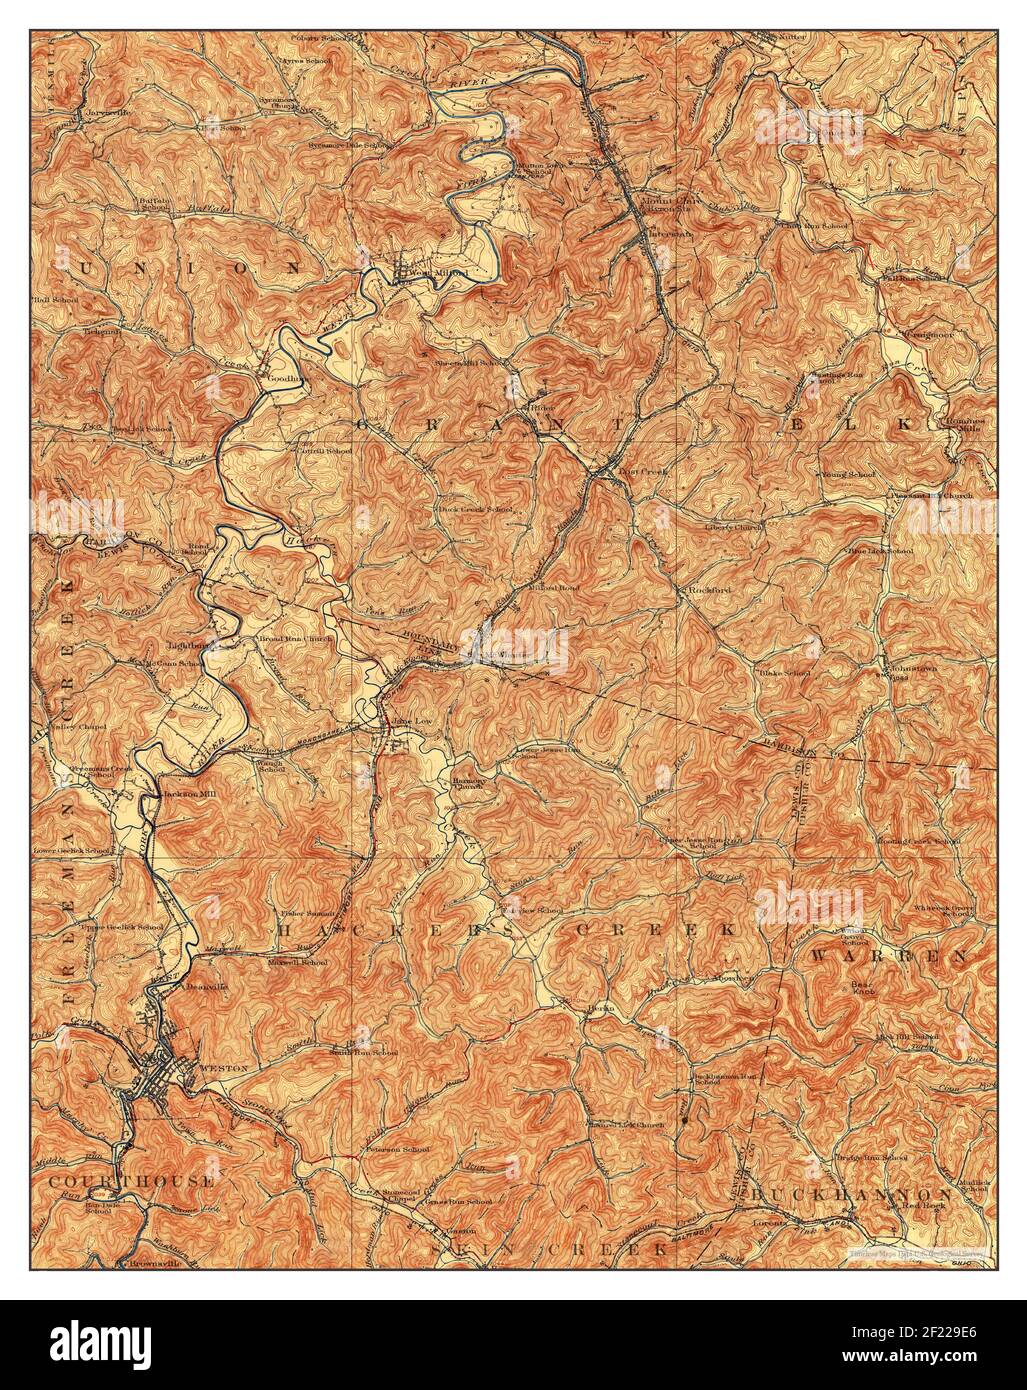 Weston, West Virginia, map 1926, 1:62500, United States of America by Timeless Maps, data U.S. Geological Survey Stock Photo